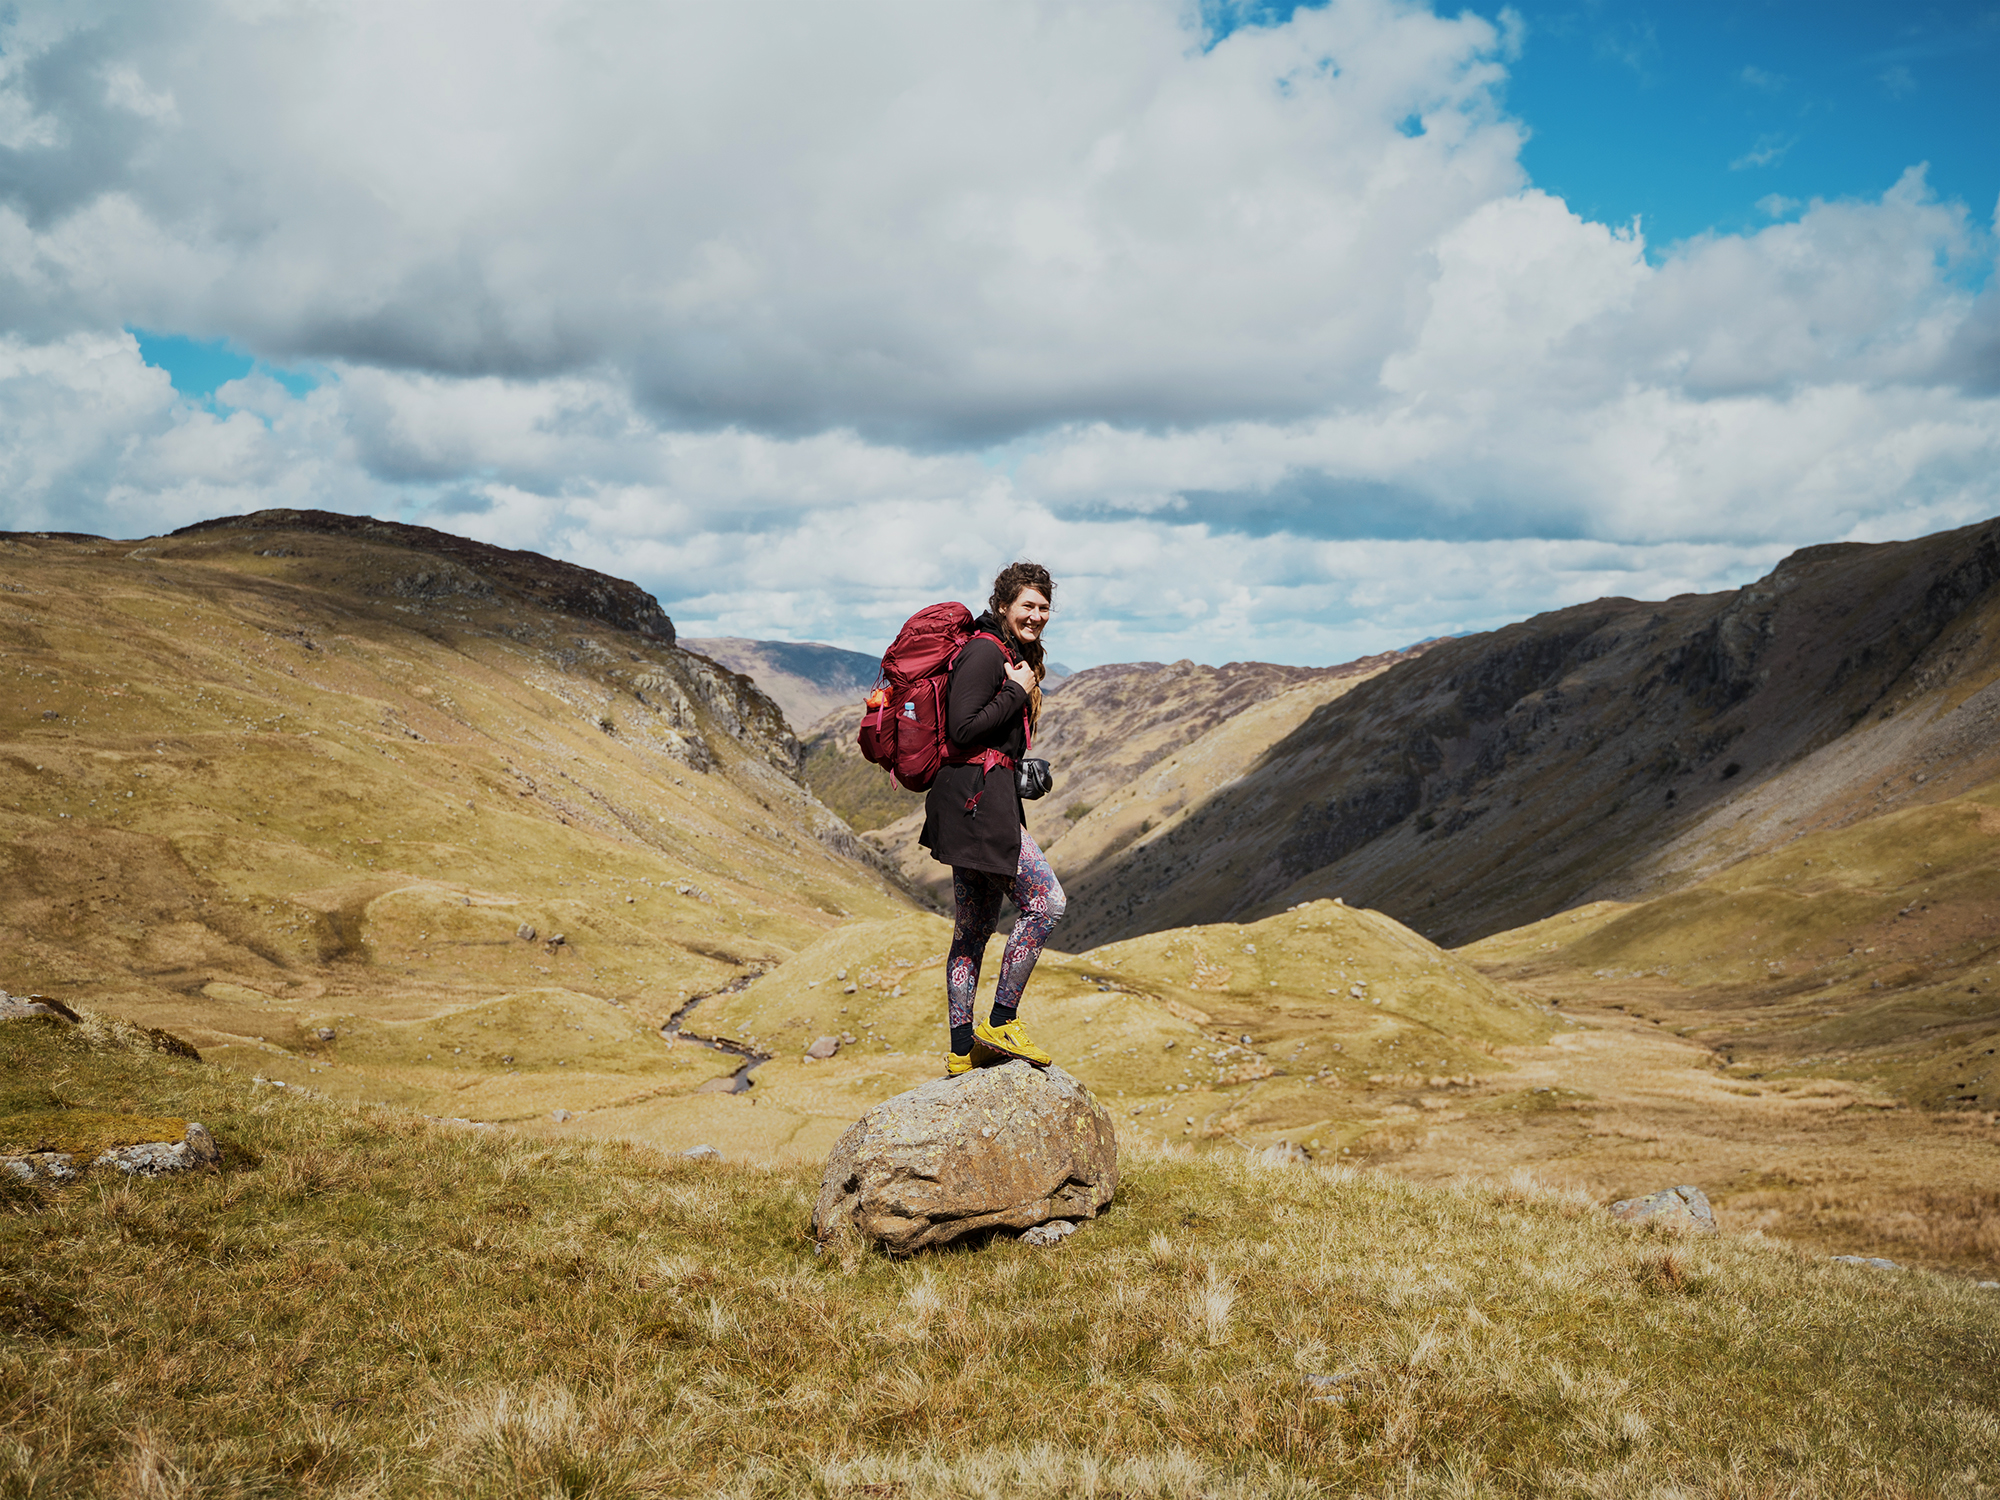 A female solo hiker standing on a rock in a mountain landscape along Wainwright's Coast to Coast Way.